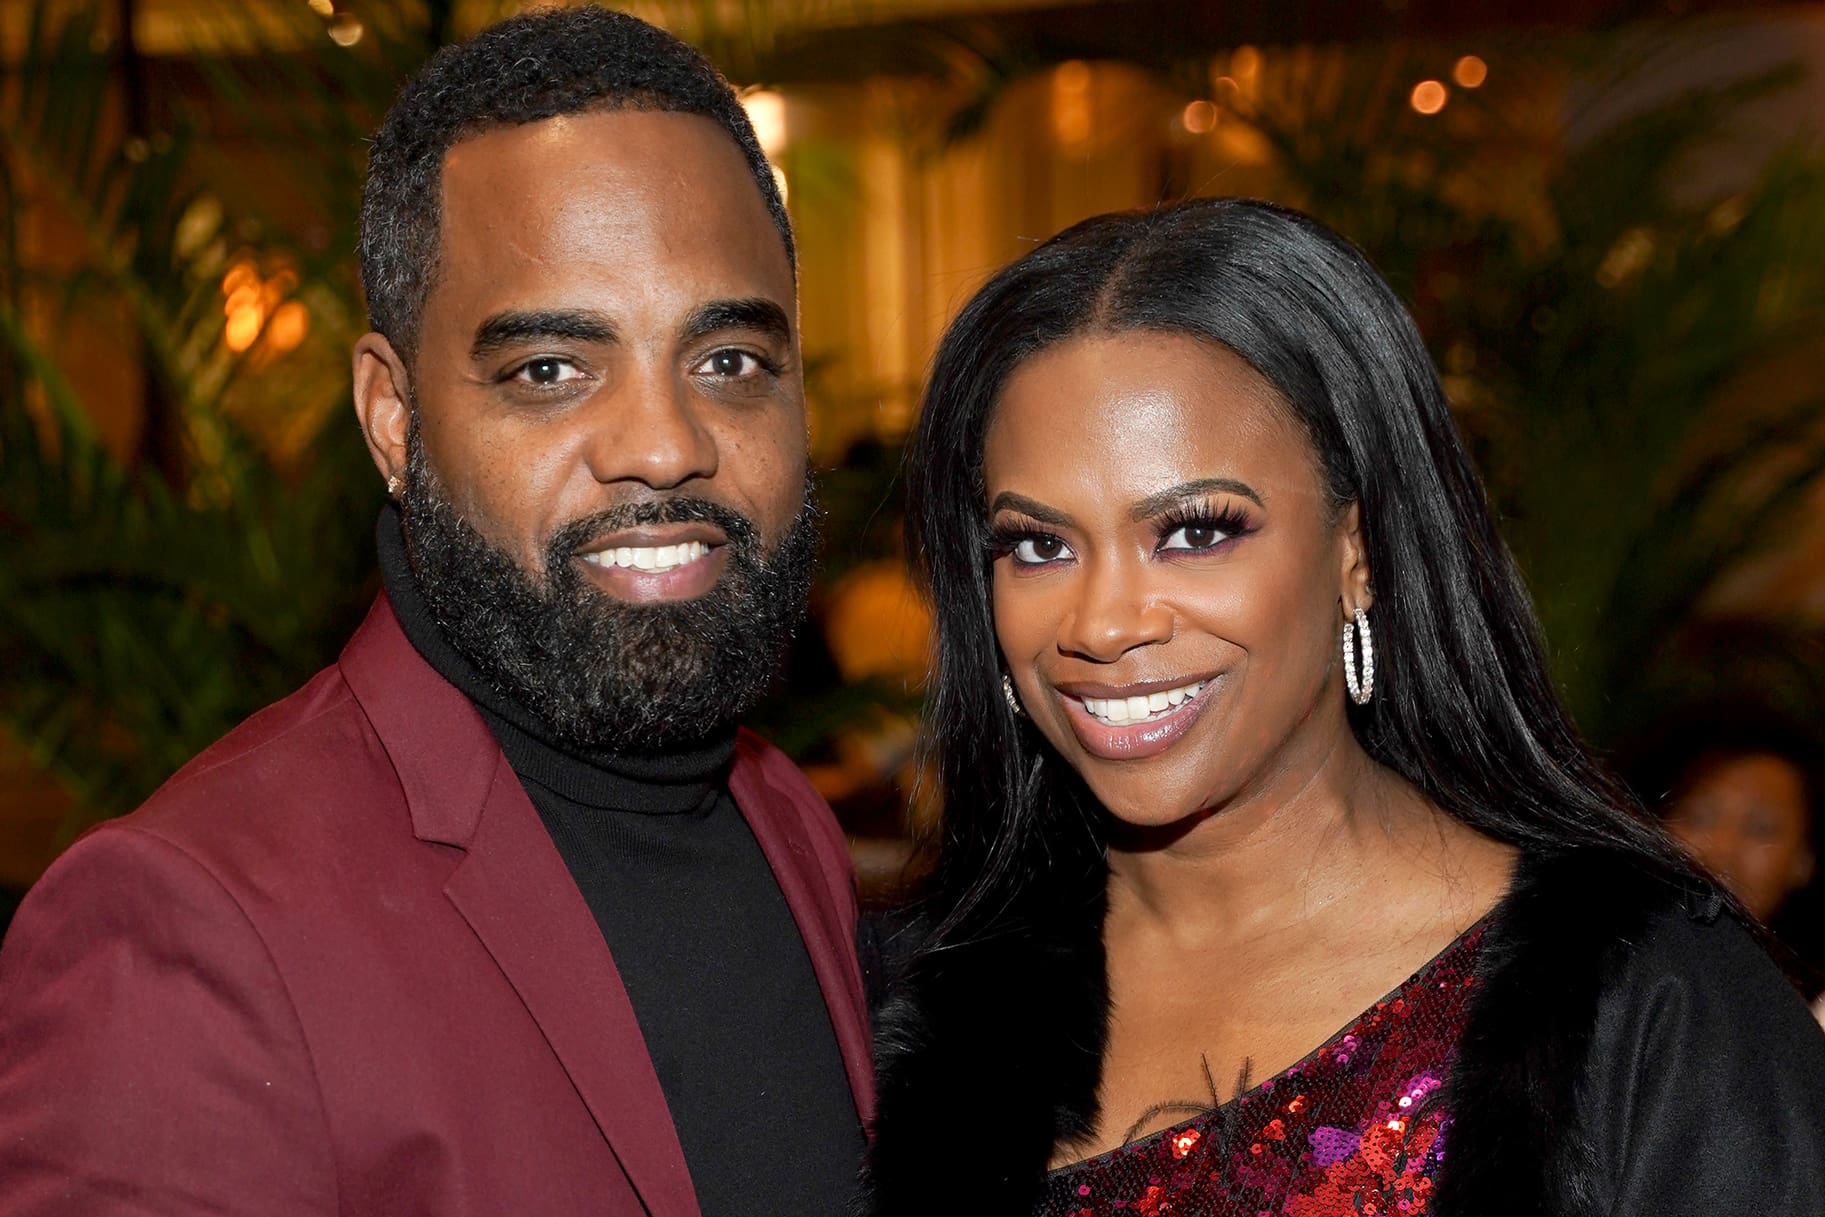 ”kandi-burruss-celebrates-an-important-person-check-out-her-photo-and-message”